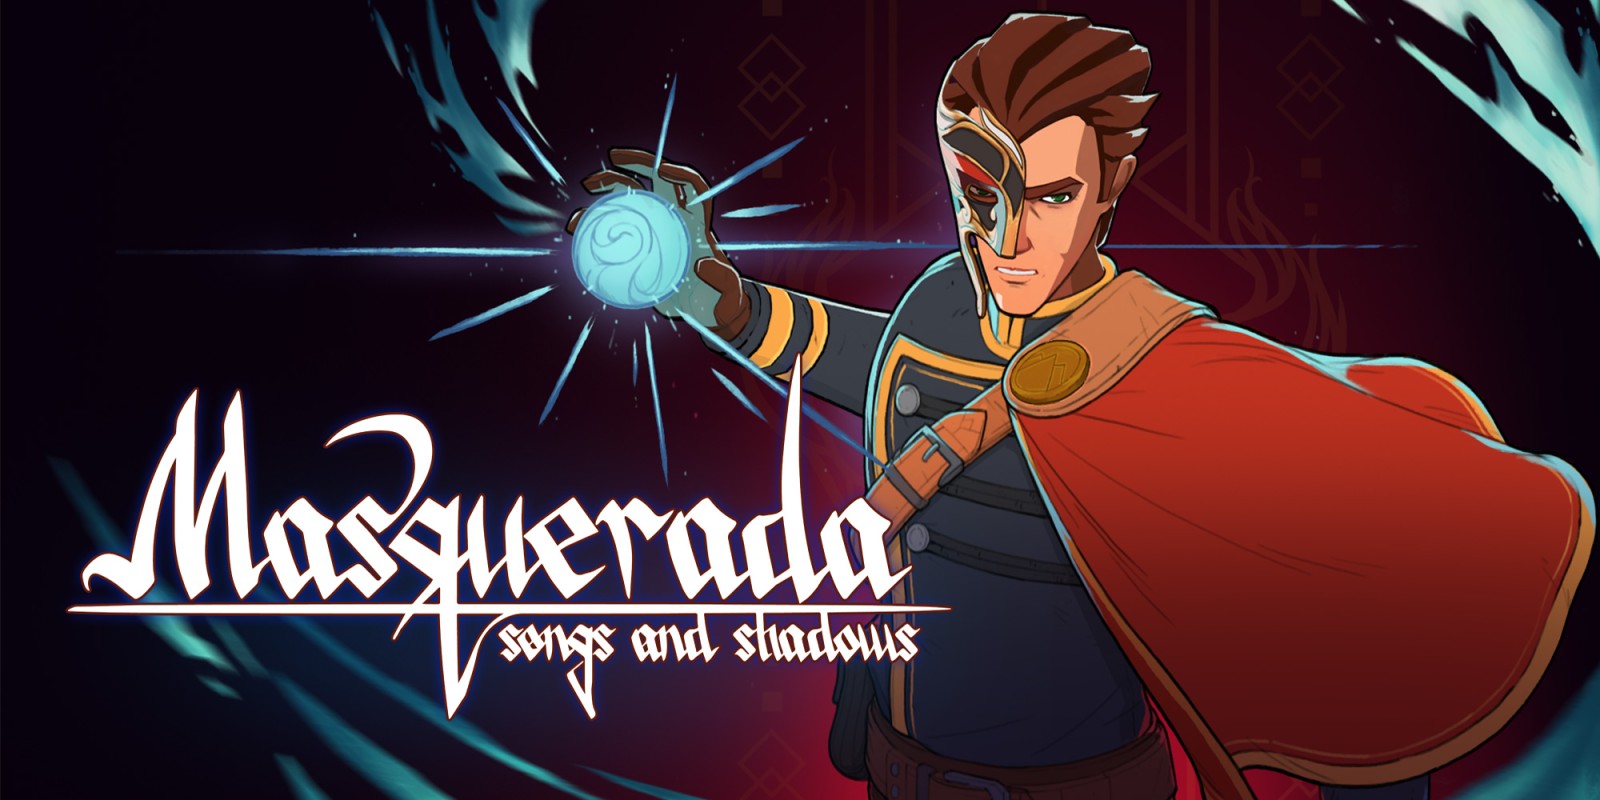 Masquerada: Song of Shadows (Switch) Review: Nobody cared who I was, till I put on the mask